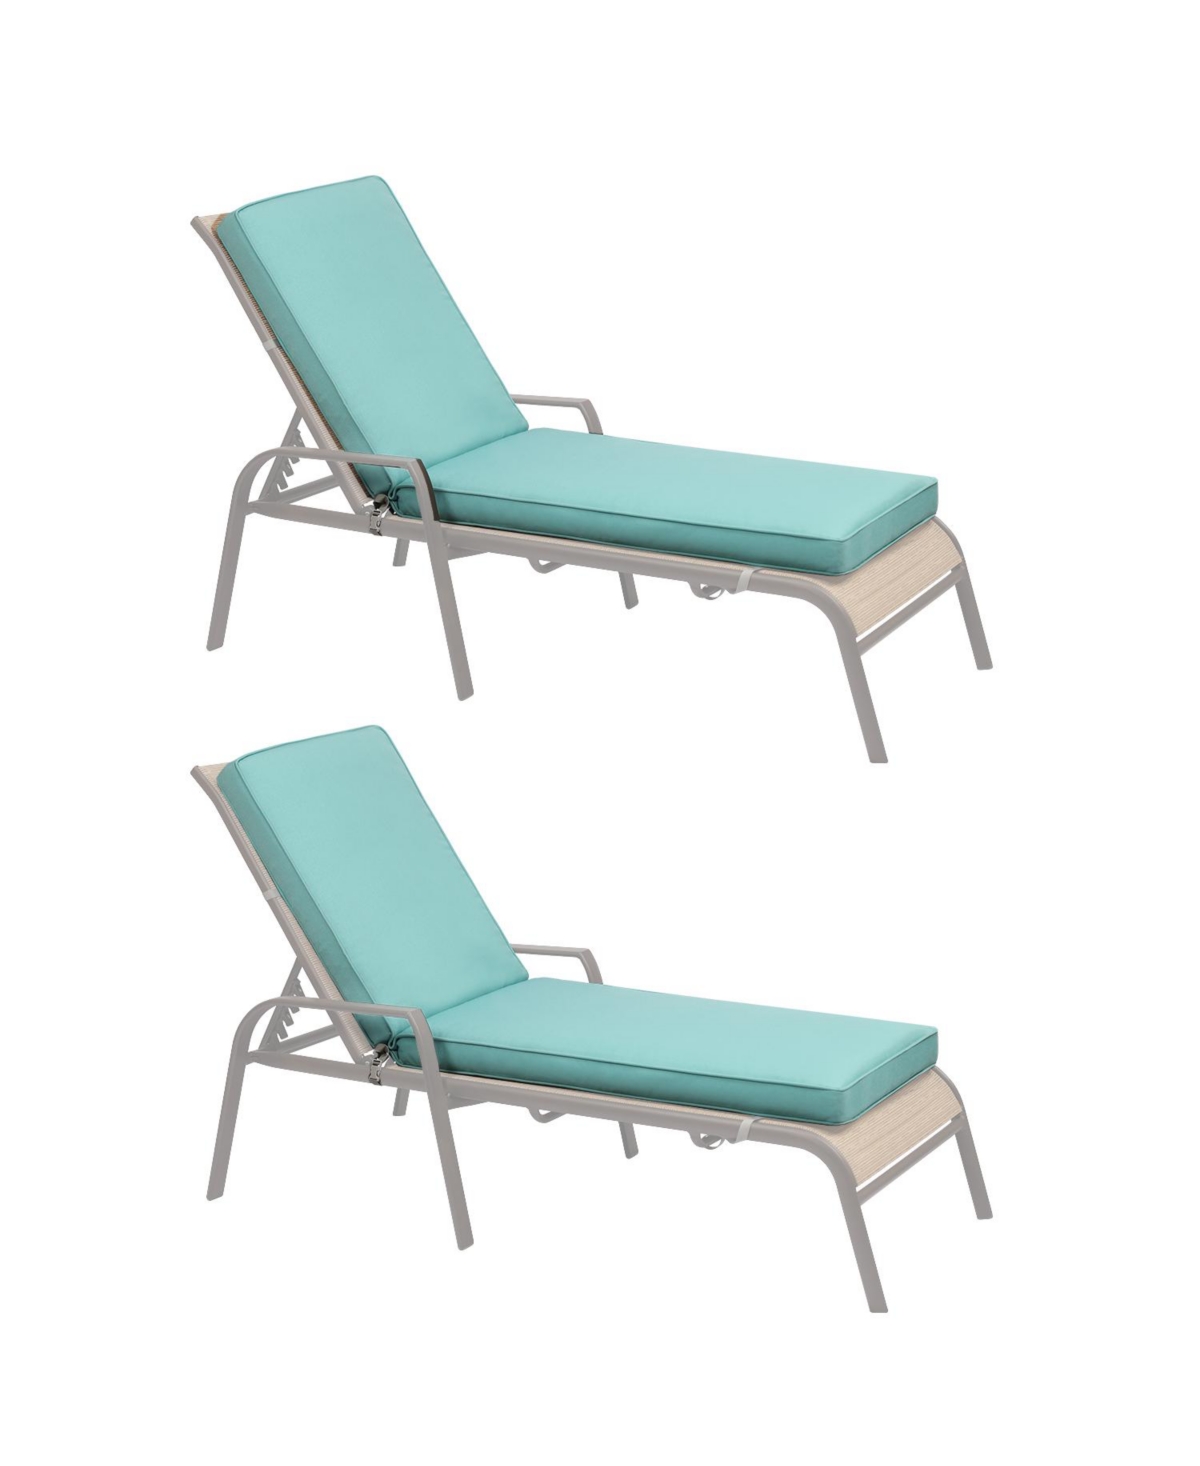 Outdoor Lounger Cushion 41.7''Lx22''Wx3''H Chair Seat Cushion - Set of 2 - Blue